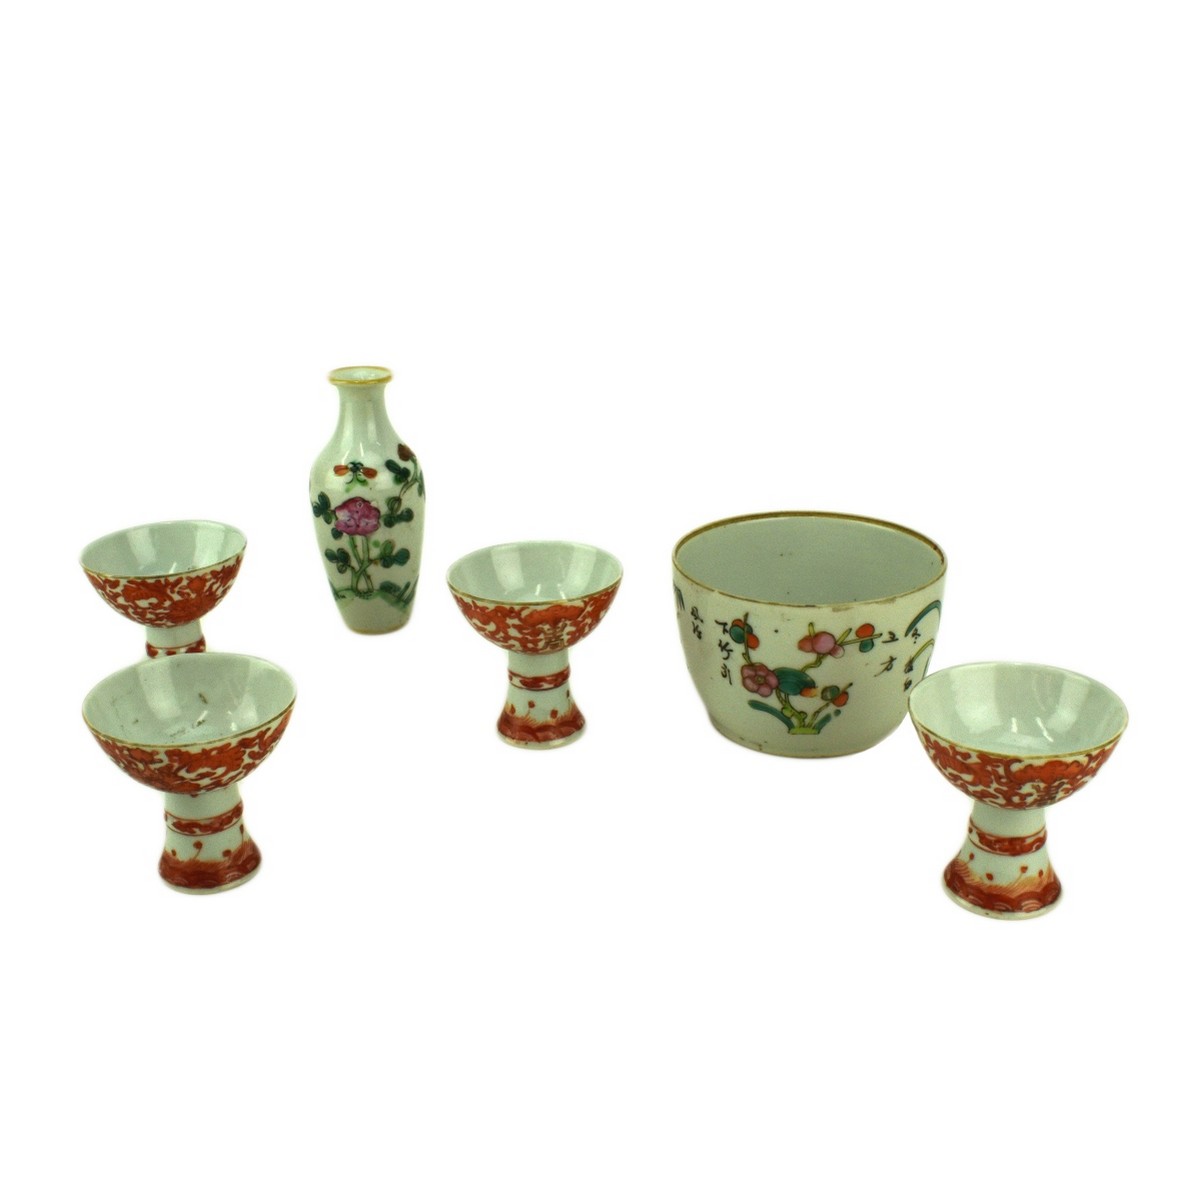 Grouping of Six (6) Chinese Porcelaian: 4 Egg Cups